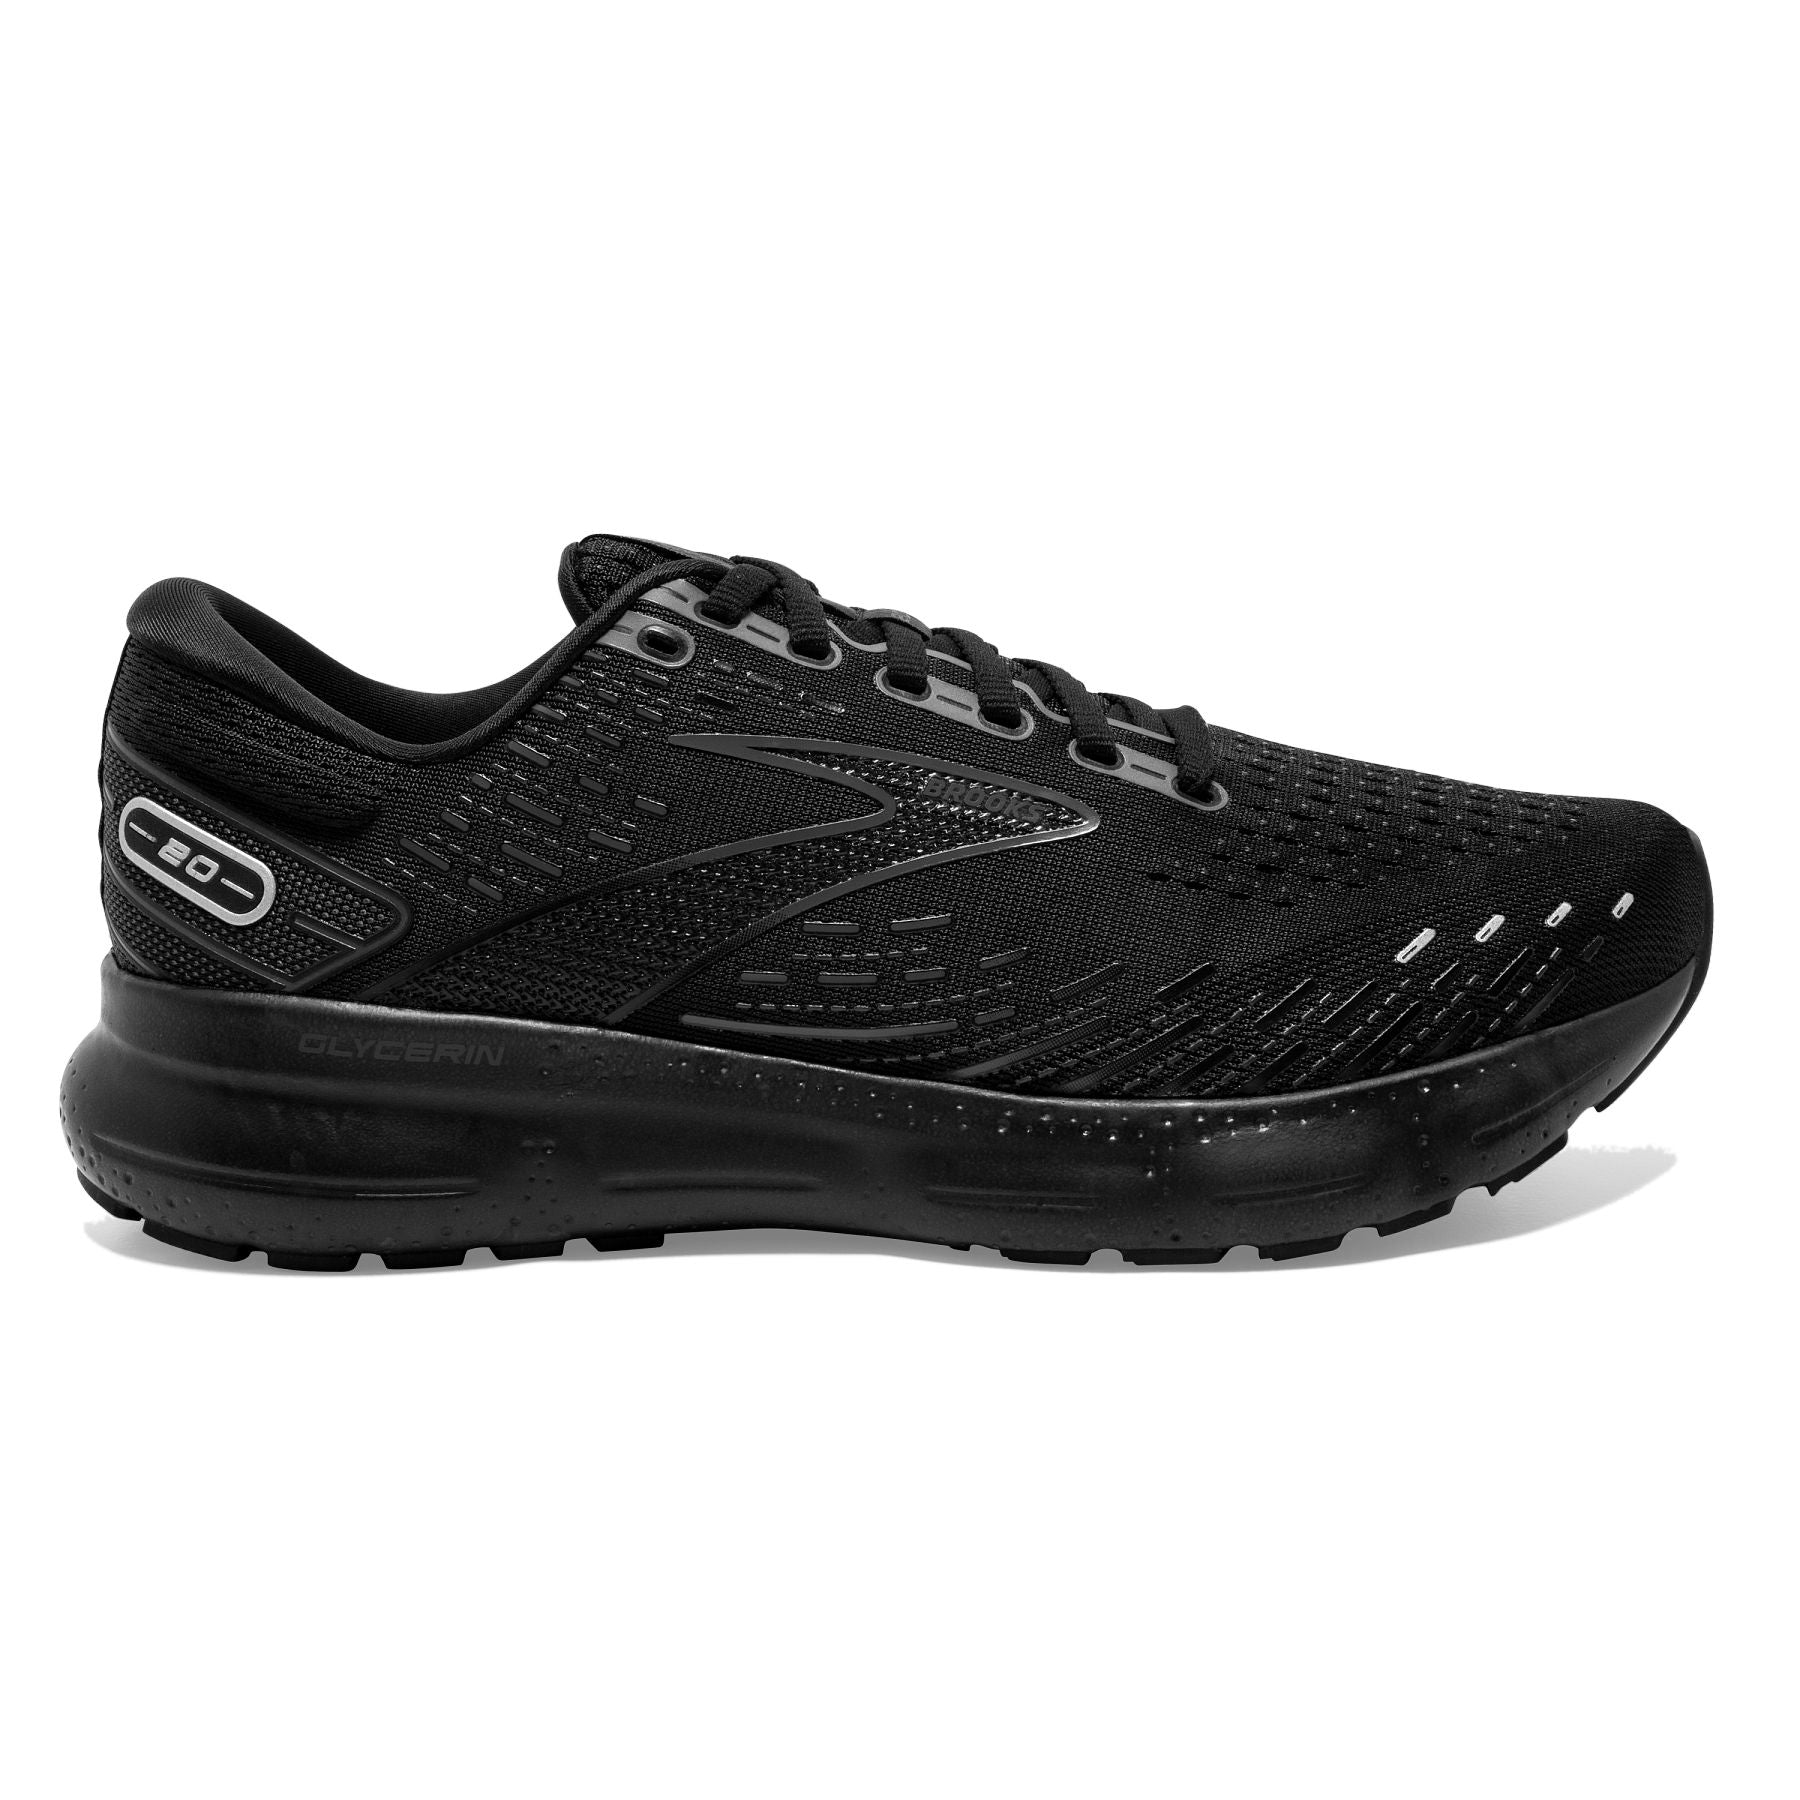 Lateral view of the Men's Glycerin 20 in the wide 2E width, color Black/Black/Ebony